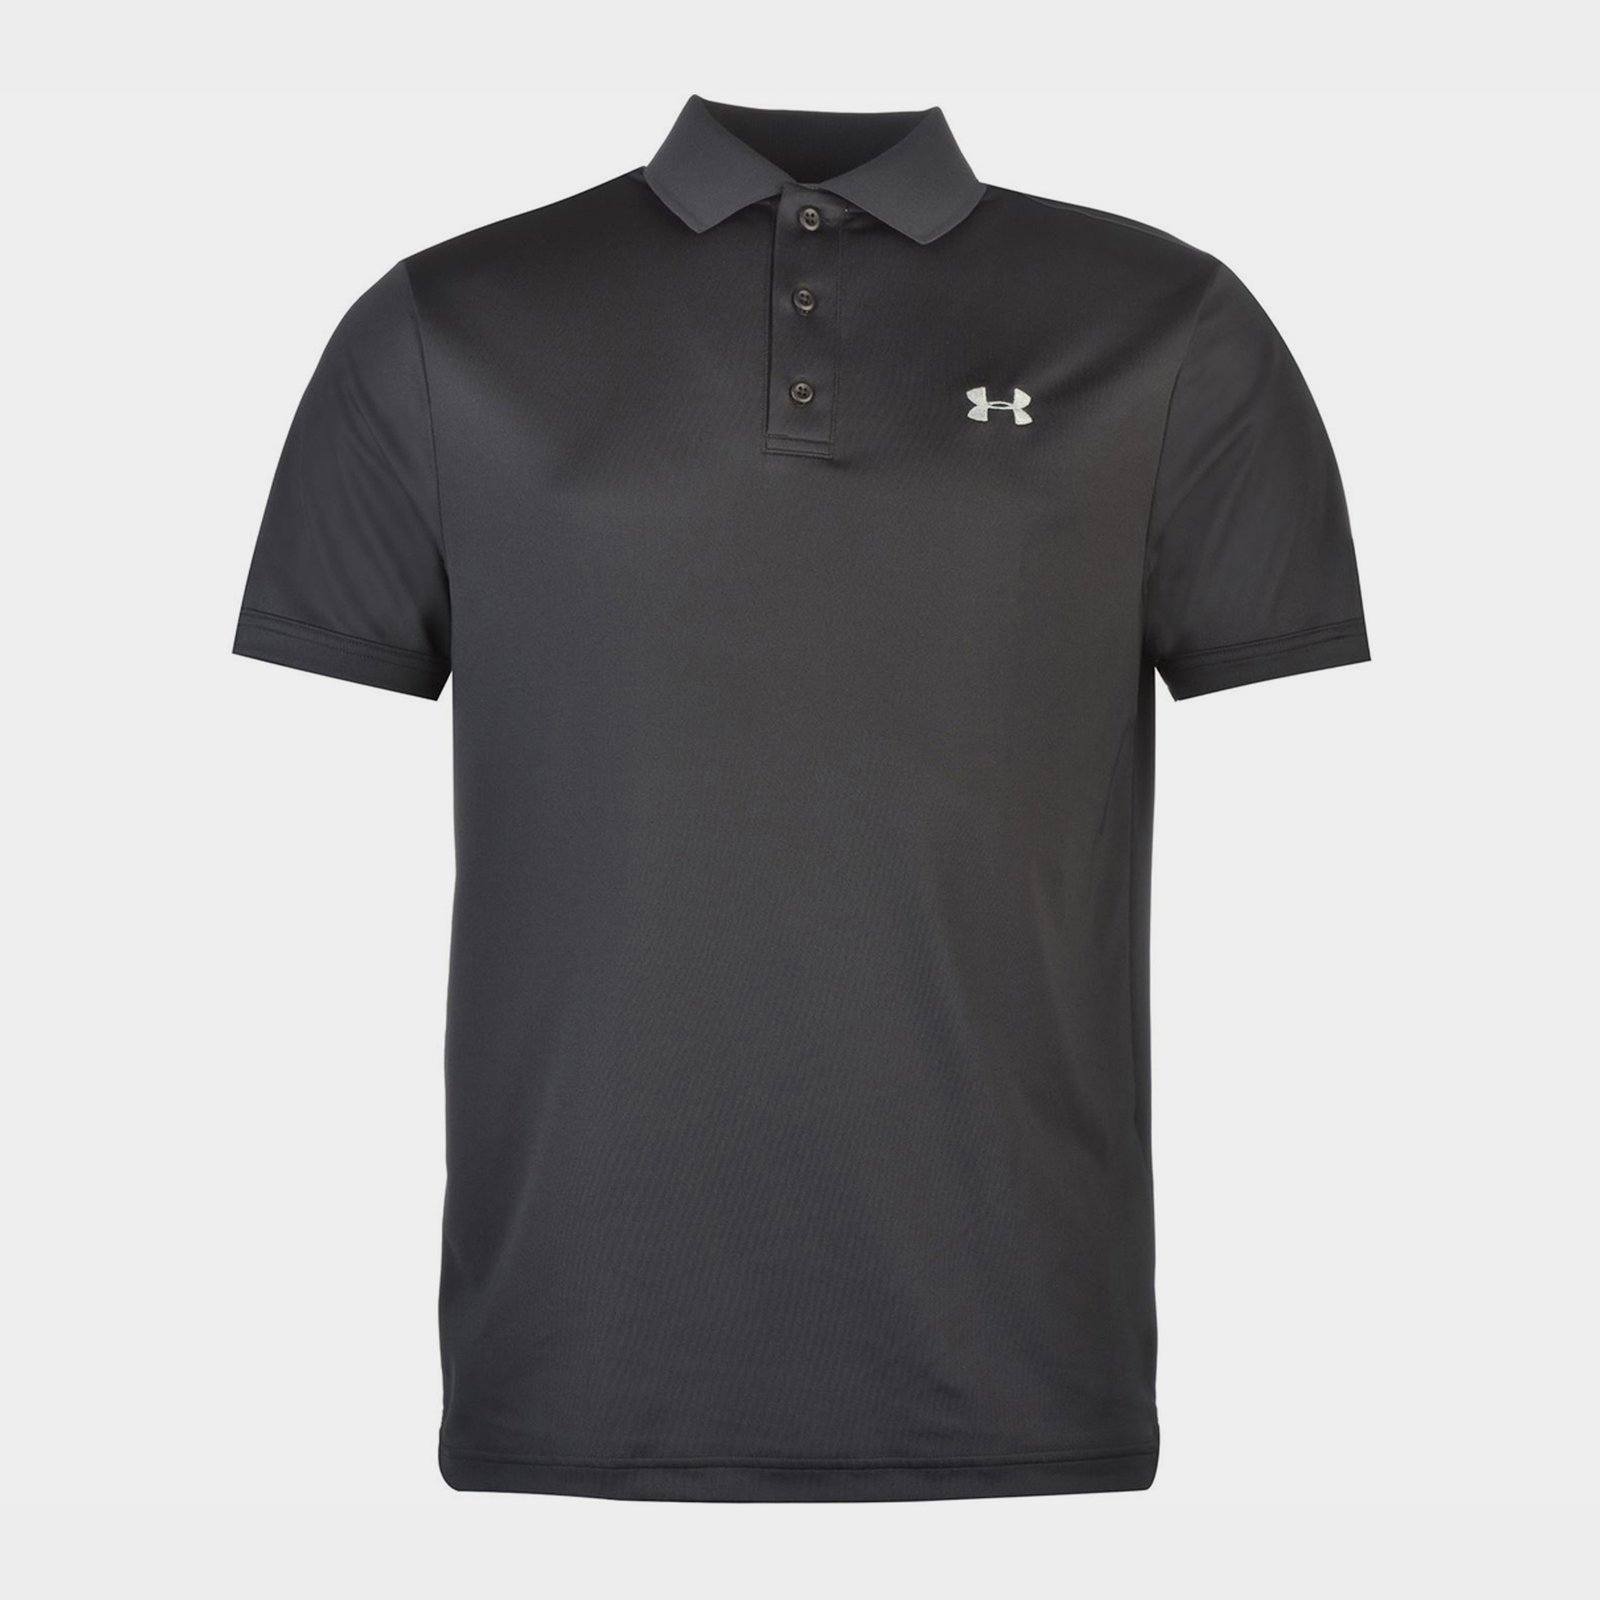 Under Armour Rugby Clothing - Lovell Rugby